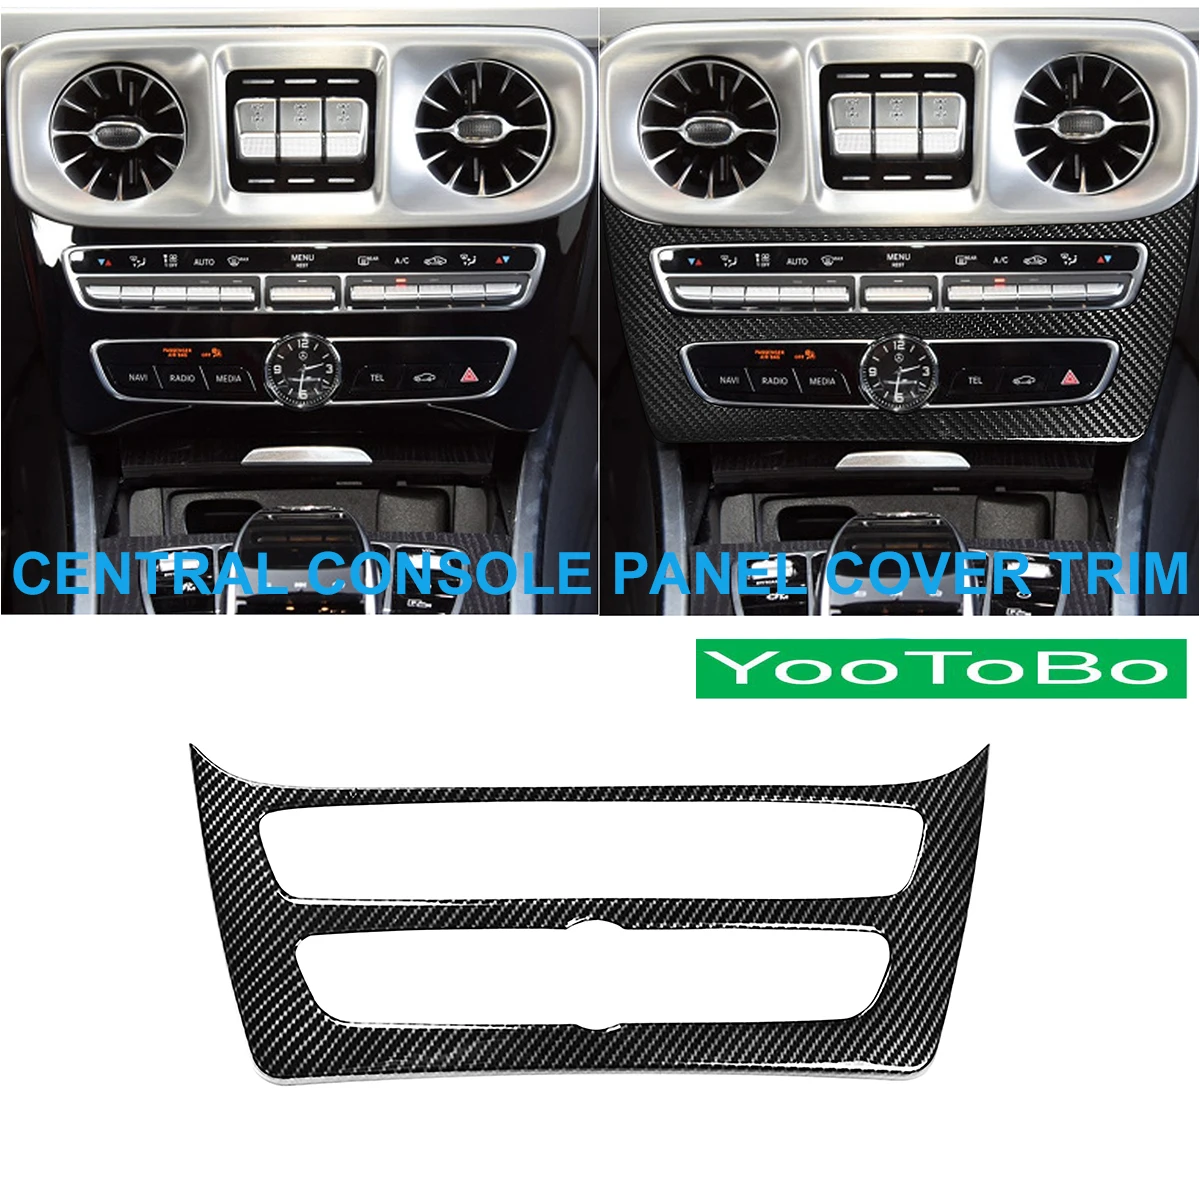 

Car Styling Real Carbon Fiber Central Console Panel Trim Cover Sticker For Mercedes BENZ G-Class W464 G63 G500 G550 2019-2020